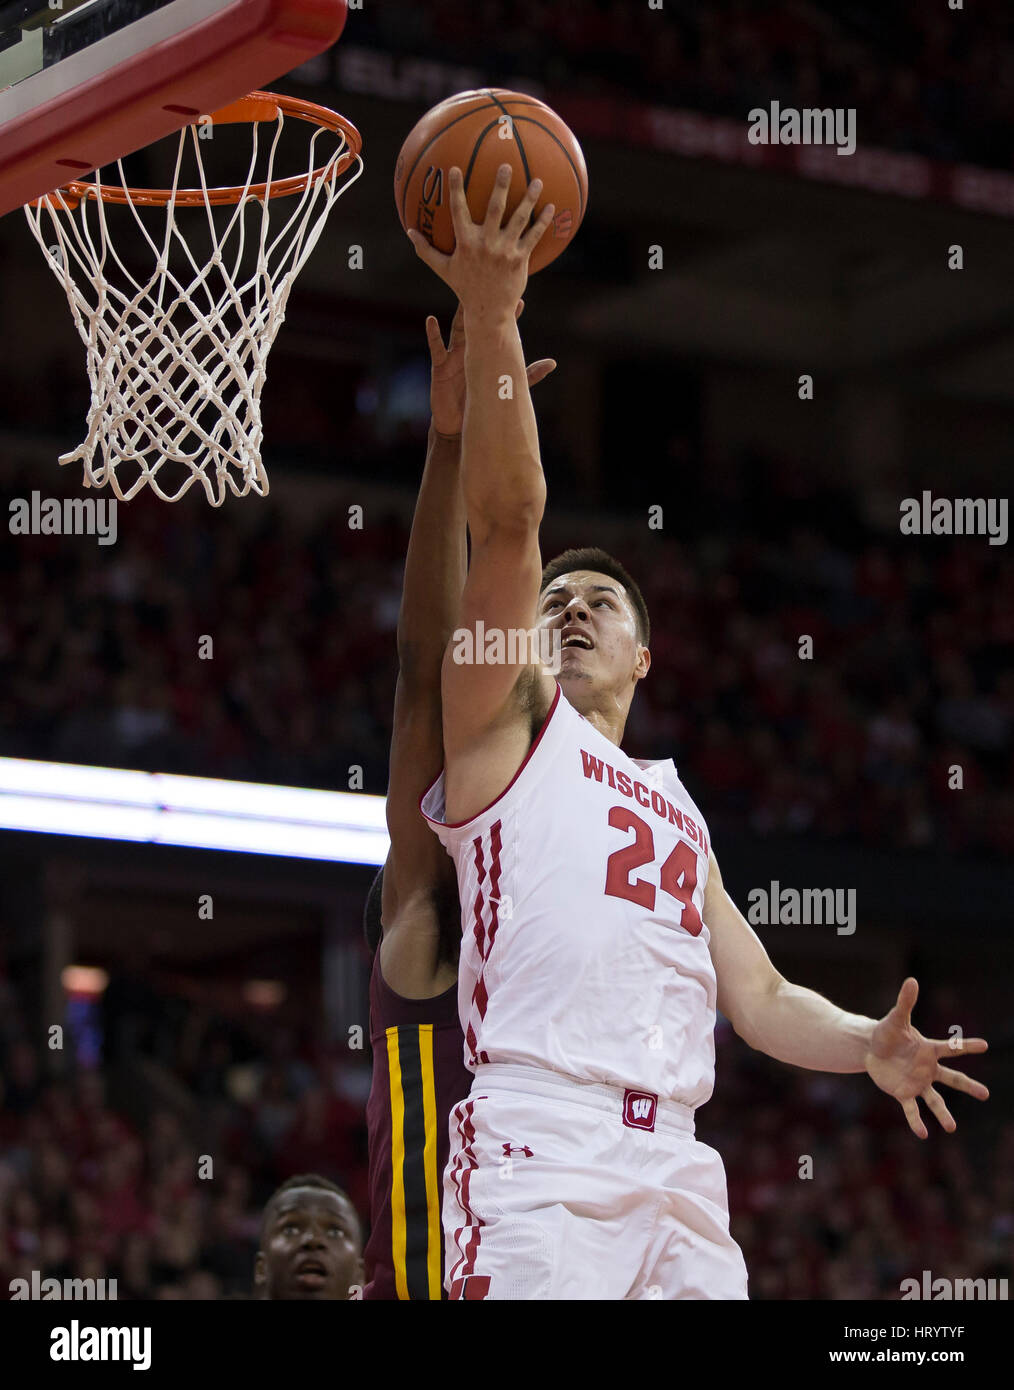 Madison, WI, USA. 5th Mar, 2017. Wisconsin Badgers guard Bronson Koenig #24 scores on a lay up in the second half of the NCAA Basketball game between the Wisconsin Badgers and the Minnesota Golden Gophers at the Kohl Center in Madison, WI. Wisconsin defeated Minnesota 66-49. John Fisher/CSM/Alamy Live News Stock Photo